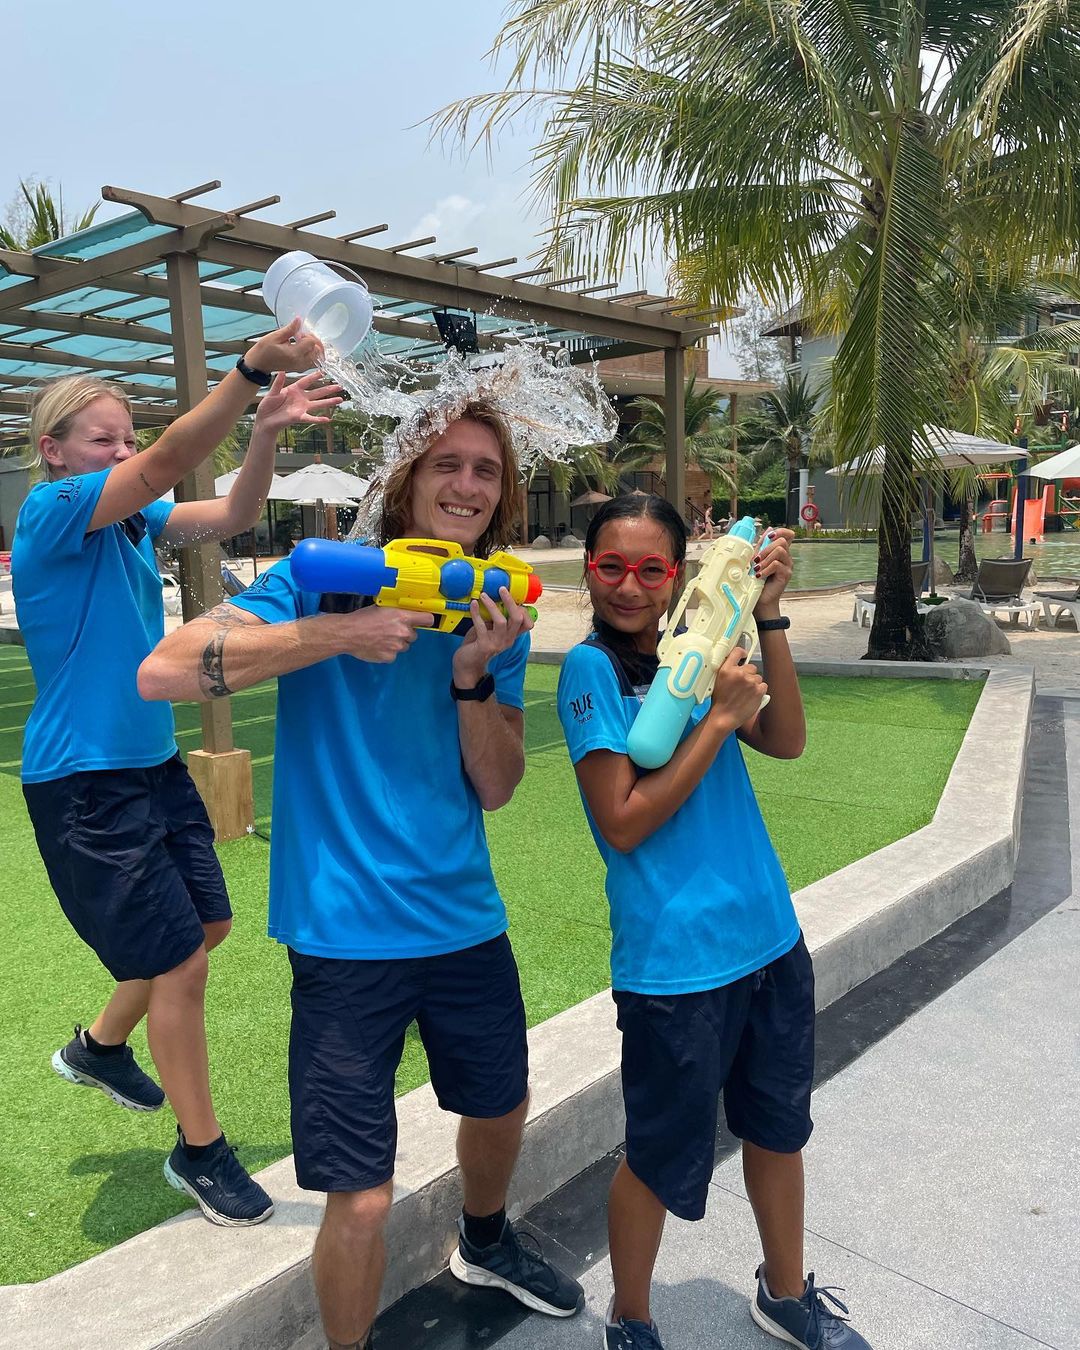 3 TUI entertainers are holding water pistols with one tipping a bucket of water onto someone who has no idea it is happening. They are stood on a pathway with grass behind them. It is a sunny day clearly from the blue sky on show.